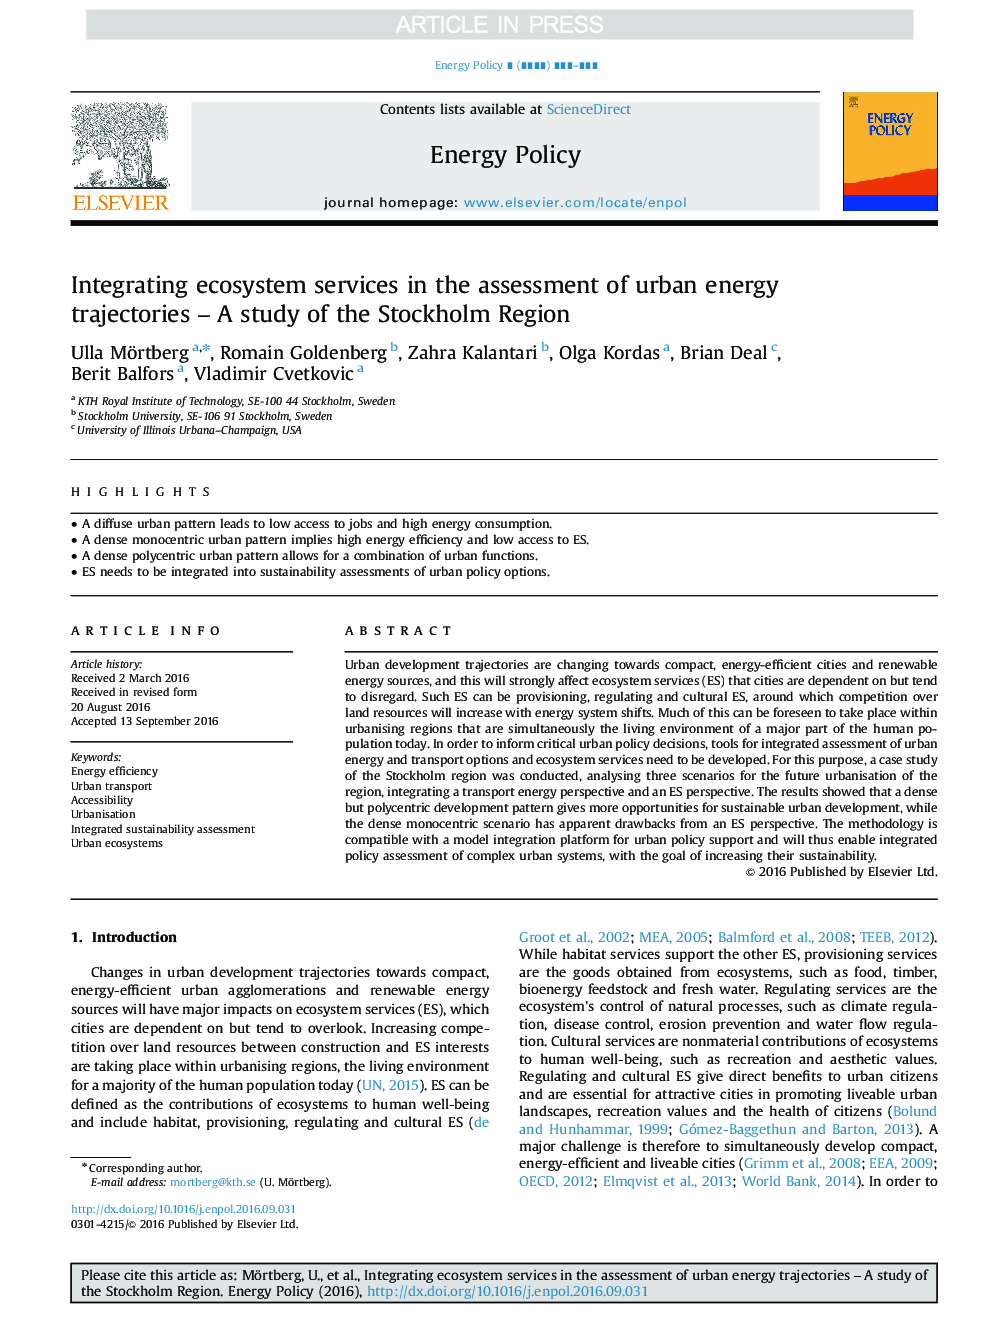 Integrating ecosystem services in the assessment of urban energy trajectories - A study of the Stockholm Region